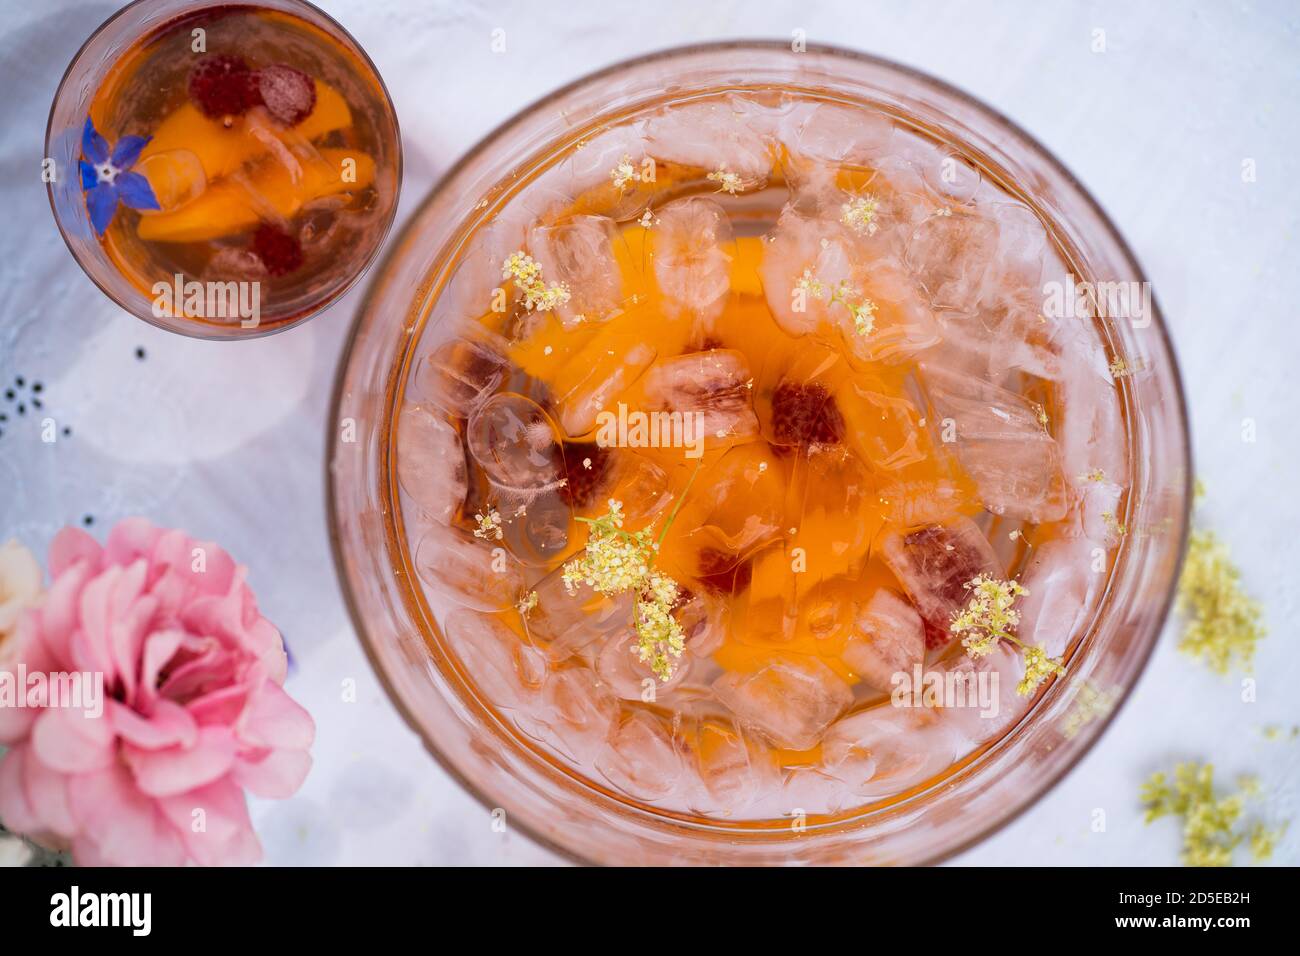 Peach party punch outdoors Stock Photo